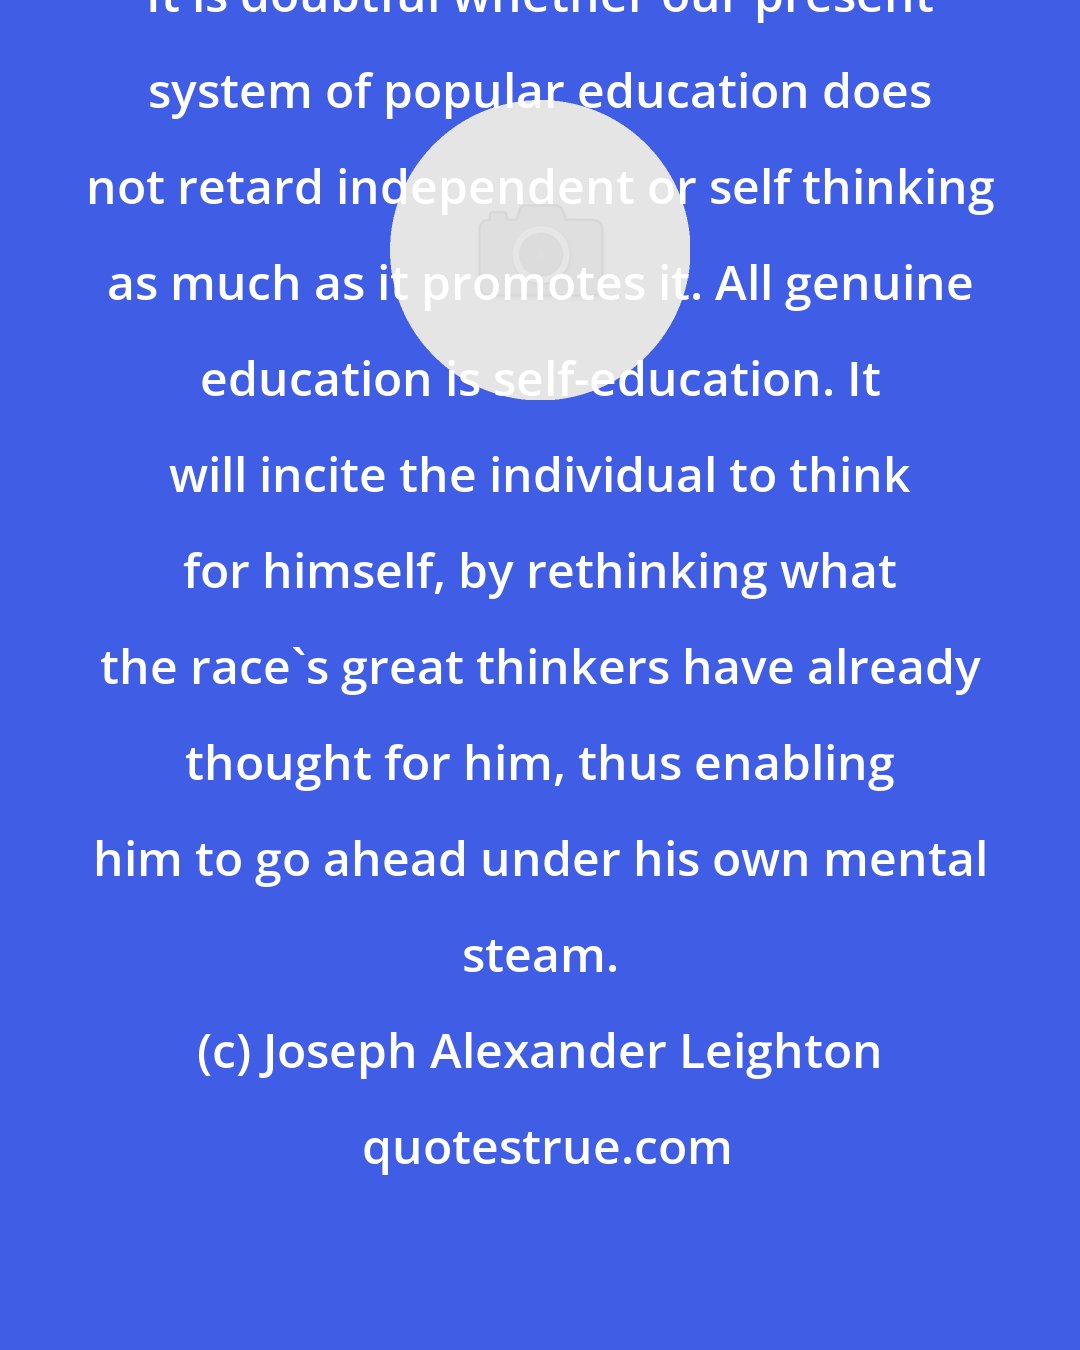 Joseph Alexander Leighton: It is doubtful whether our present system of popular education does not retard independent or self thinking as much as it promotes it. All genuine education is self-education. It will incite the individual to think for himself, by rethinking what the race's great thinkers have already thought for him, thus enabling him to go ahead under his own mental steam.